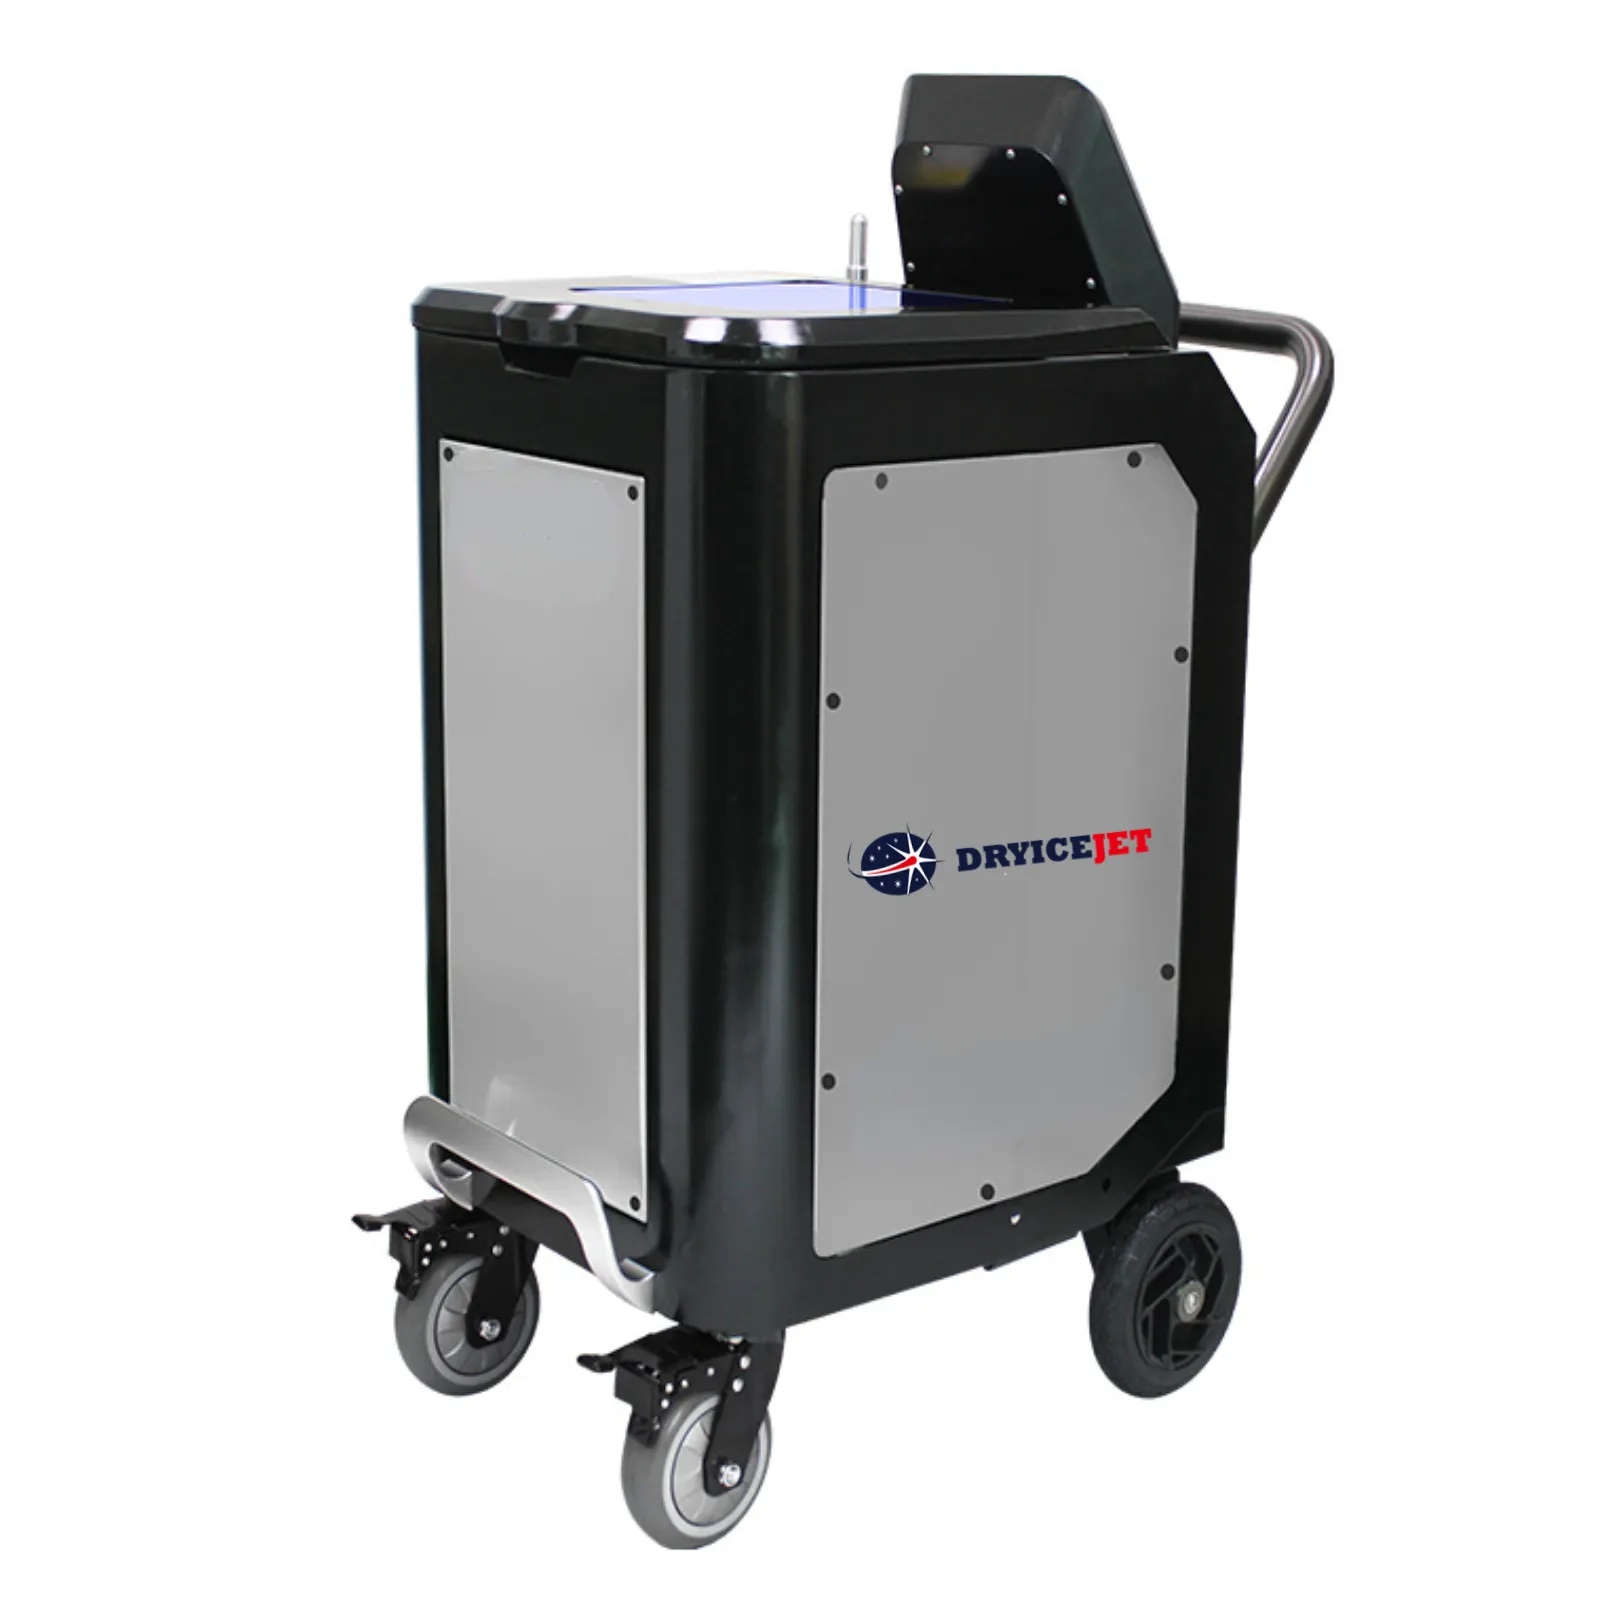 DRYICEJET P9 Pro Factory Price Wholesale clean portable dryiceblastercleaningcarchassis dry ice blasting machine